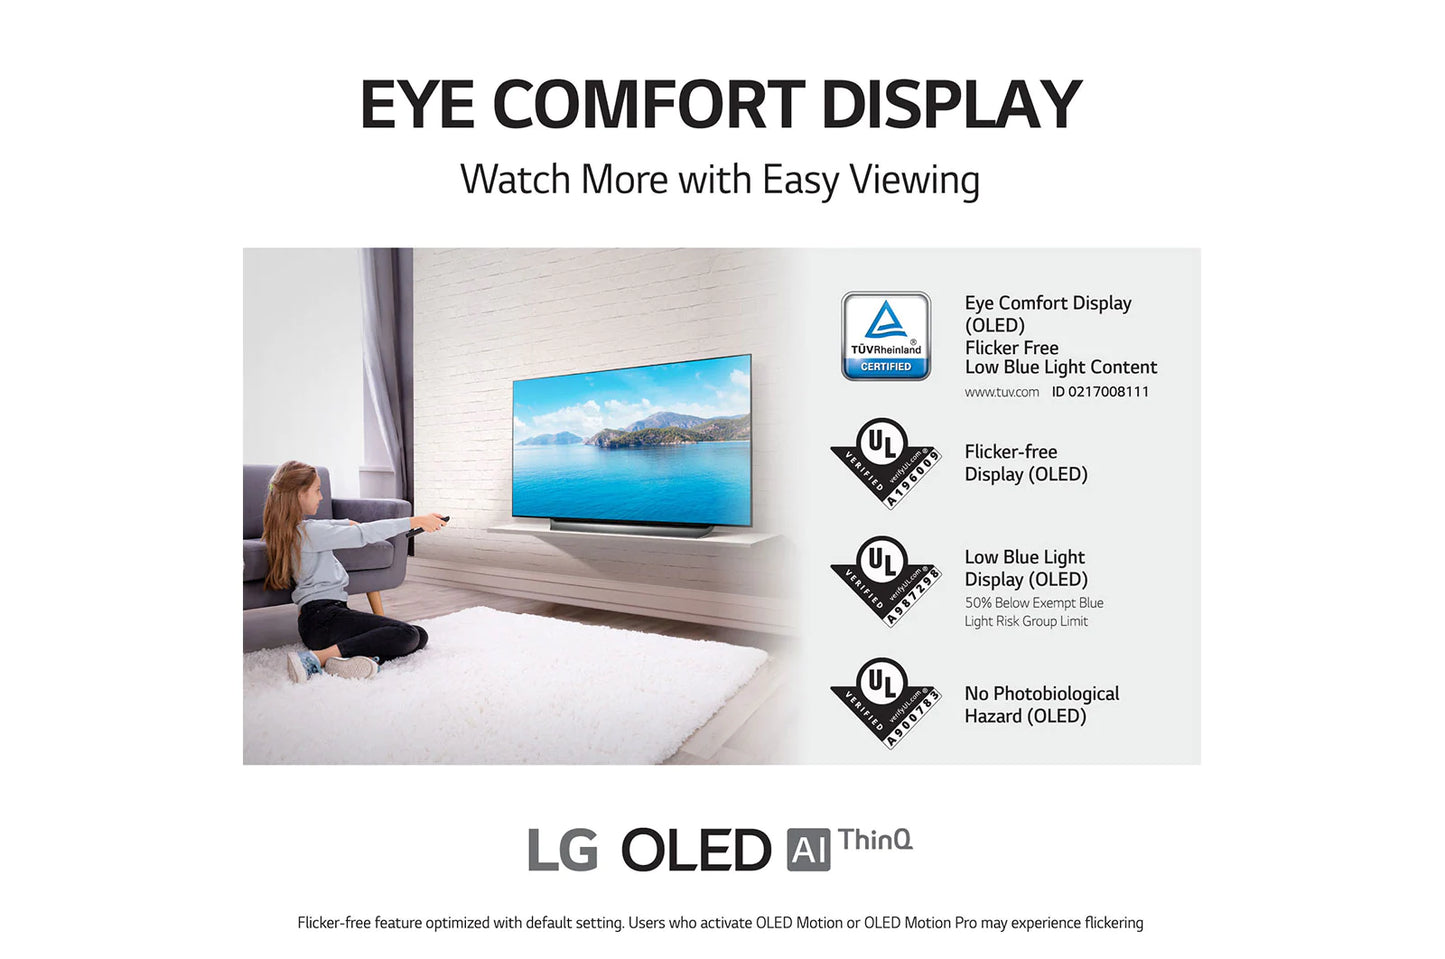 LG 65 Inch OLED AI THINQ 4K SMART TV C1PVB with Built In Satellite Receiver and Magic Remote